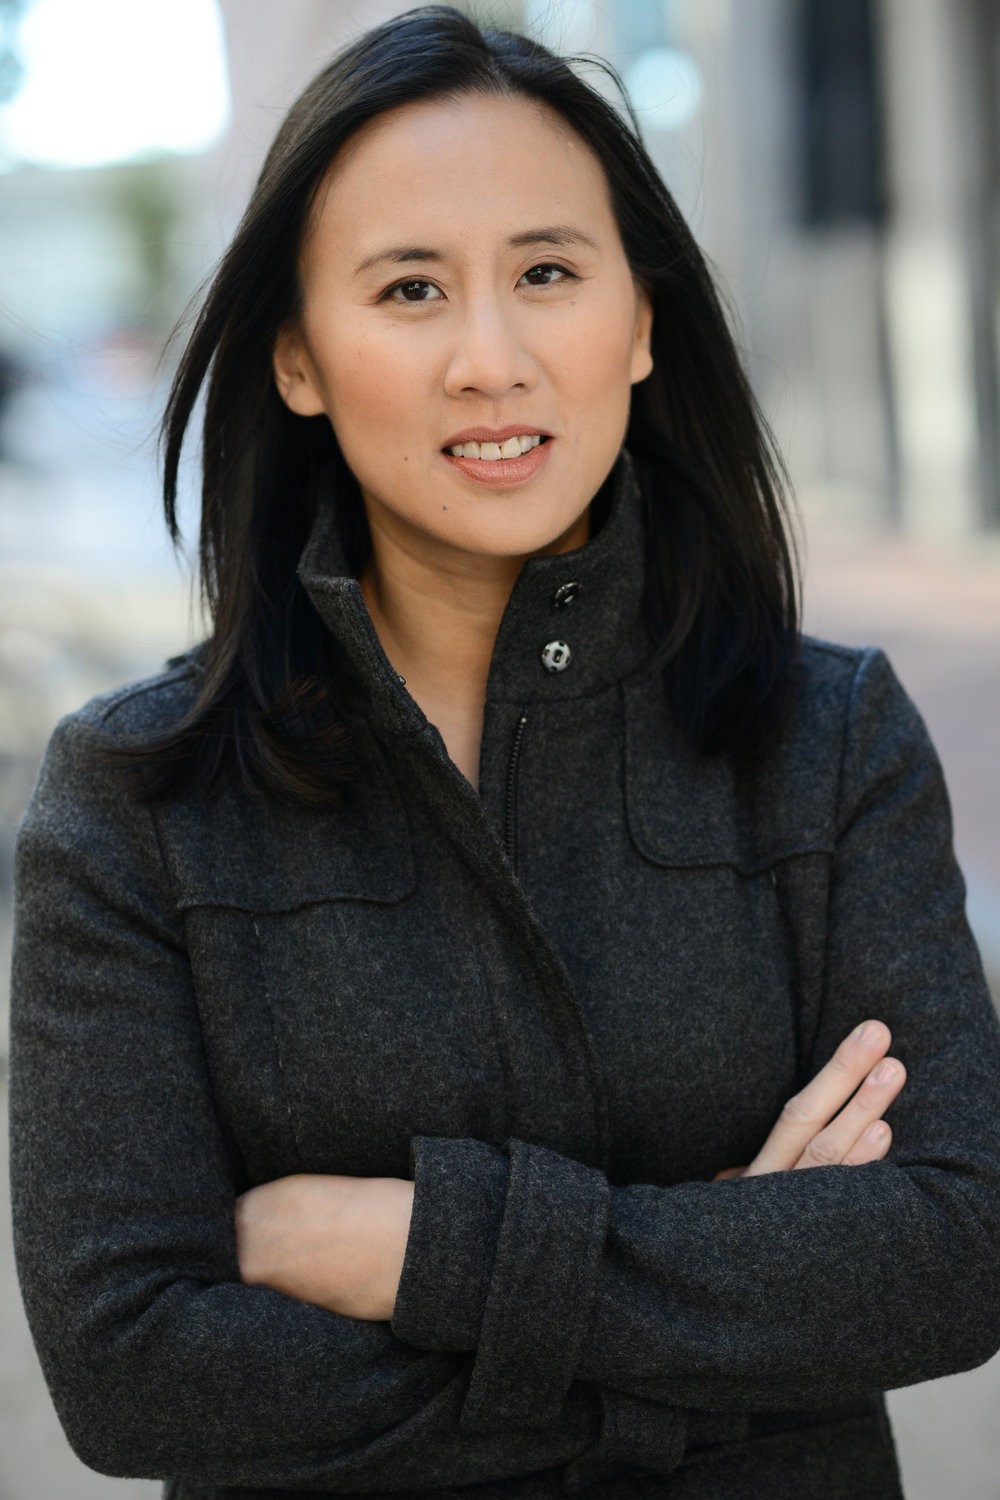 Chinese-American author Celeste Ng does not rule out the possibility of one of her future novels having events set in Hong Kong, where her family is from.